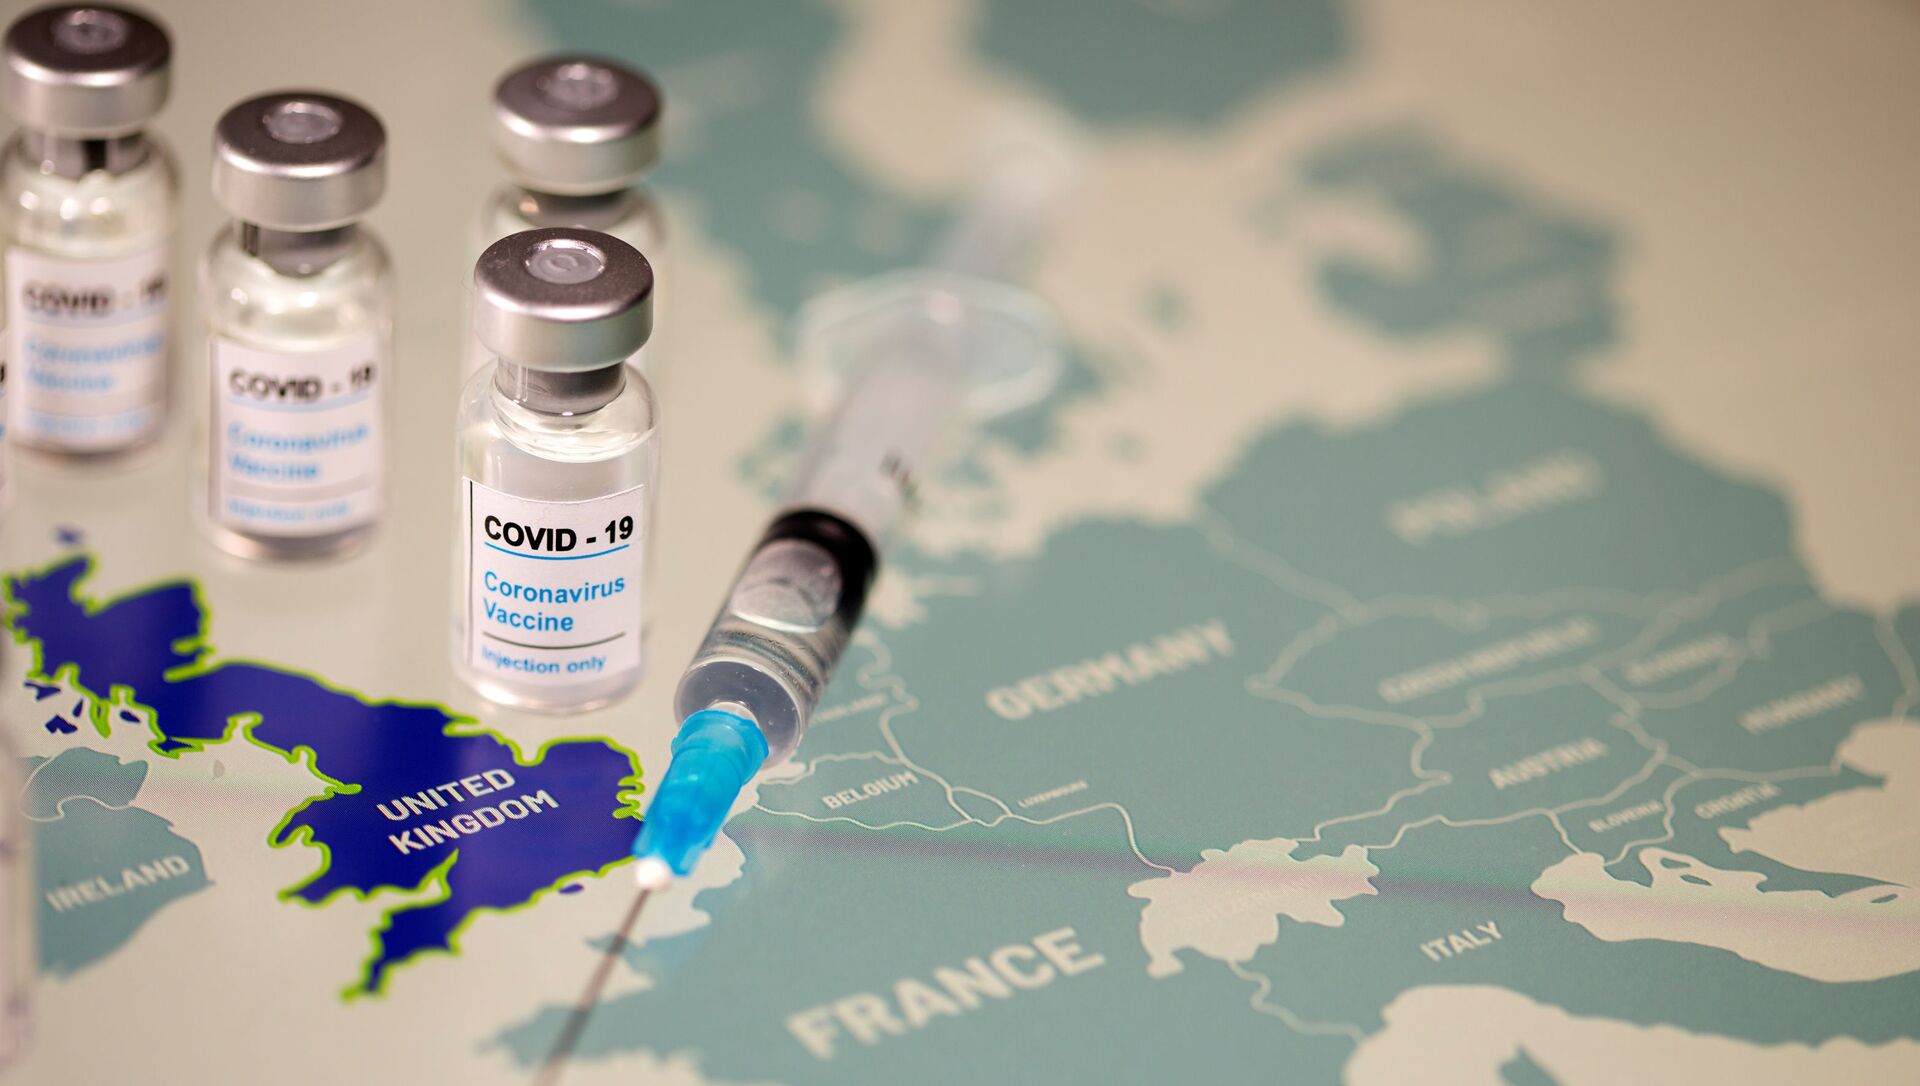 FILE PHOTO: Vials labelled COVID-19 Coronavirus-Vaccine and medical syringe are placed on the European Union map in this picture illustration taken December 2, 2020. REUTERS/Dado Ruvic/Illustration/File Photo - Sputnik International, 1920, 02.03.2021